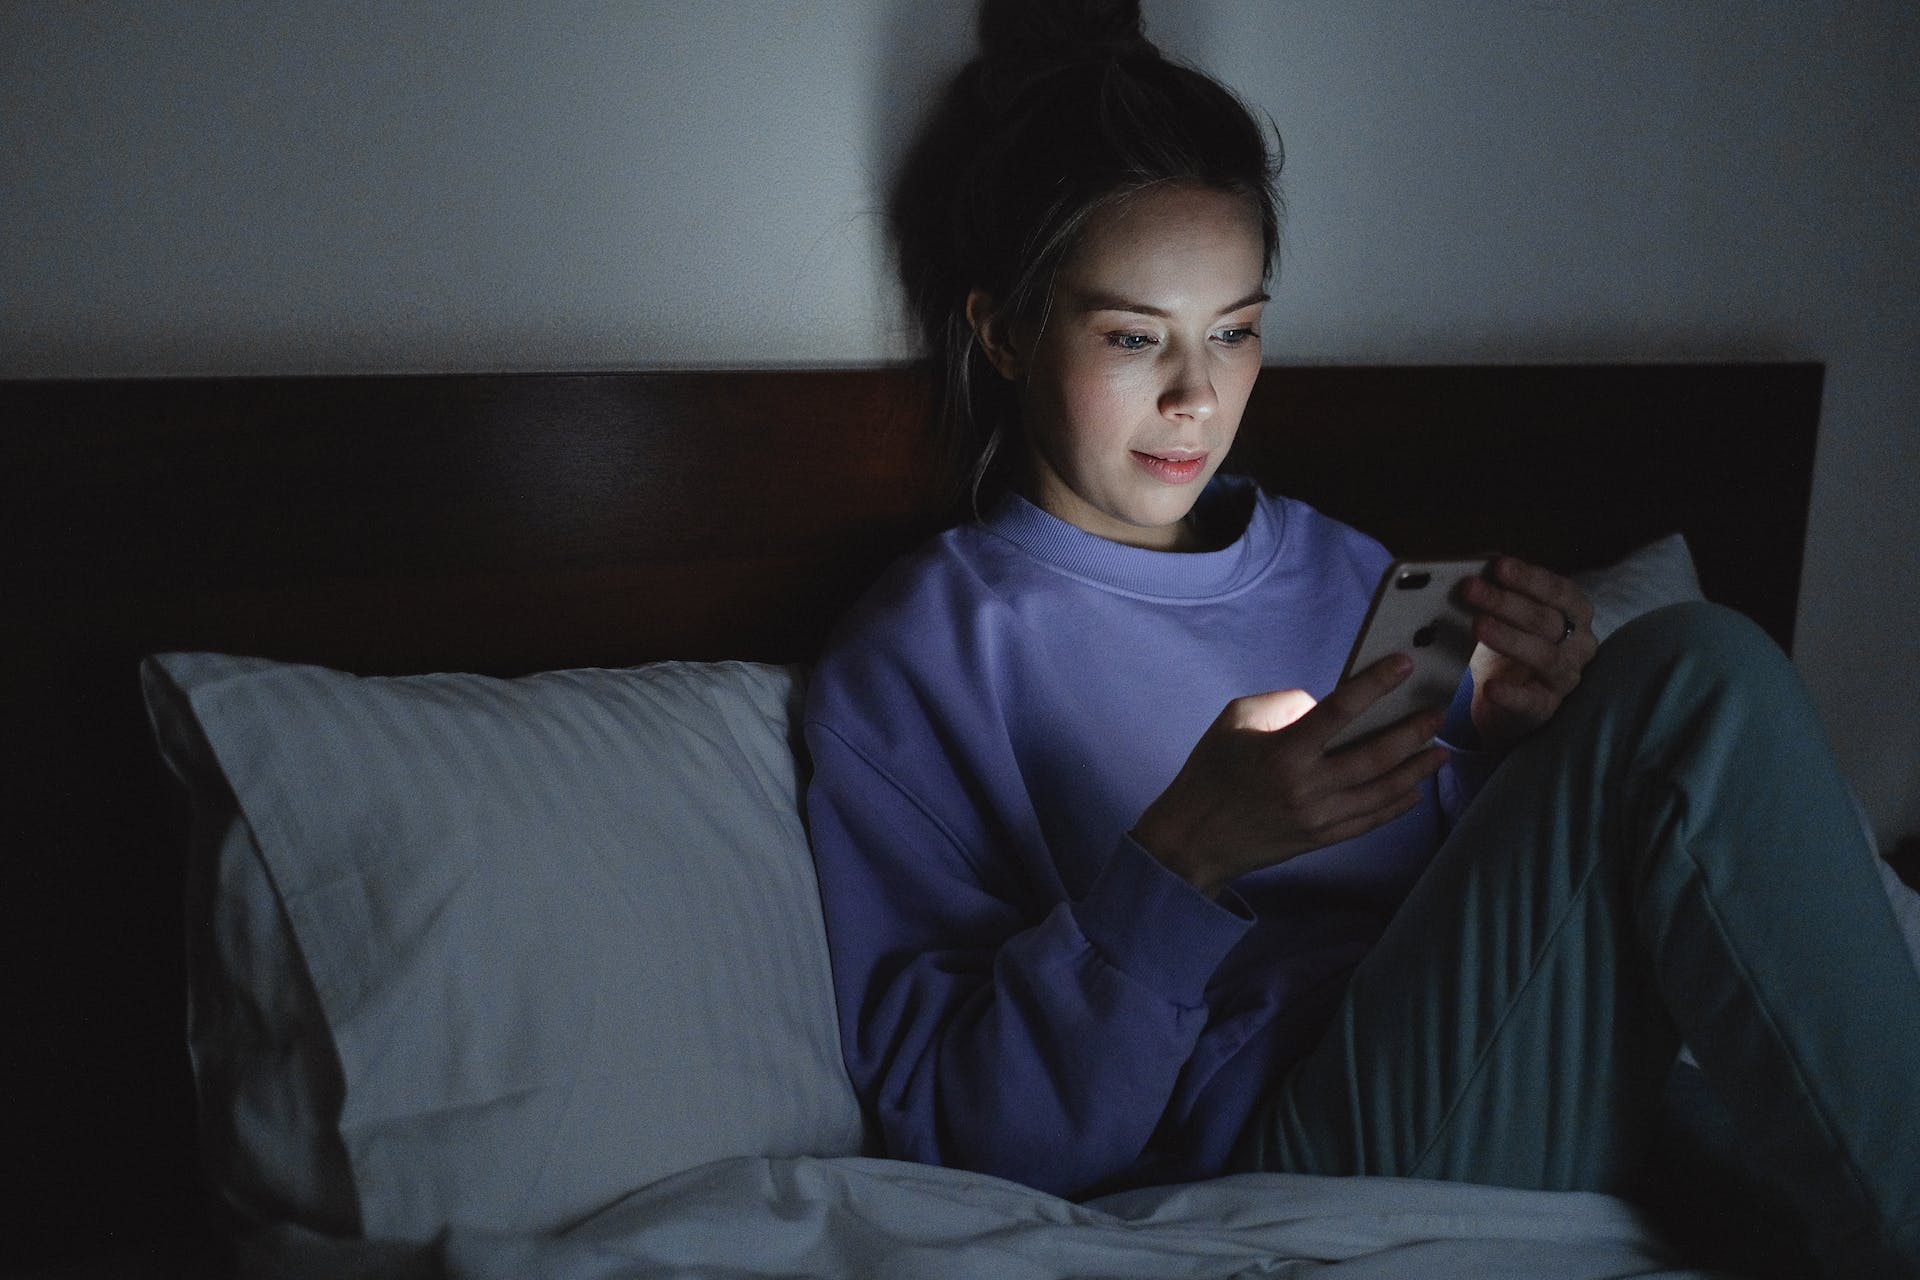 Woman using her phone while sitting on bed | Source: Pexels